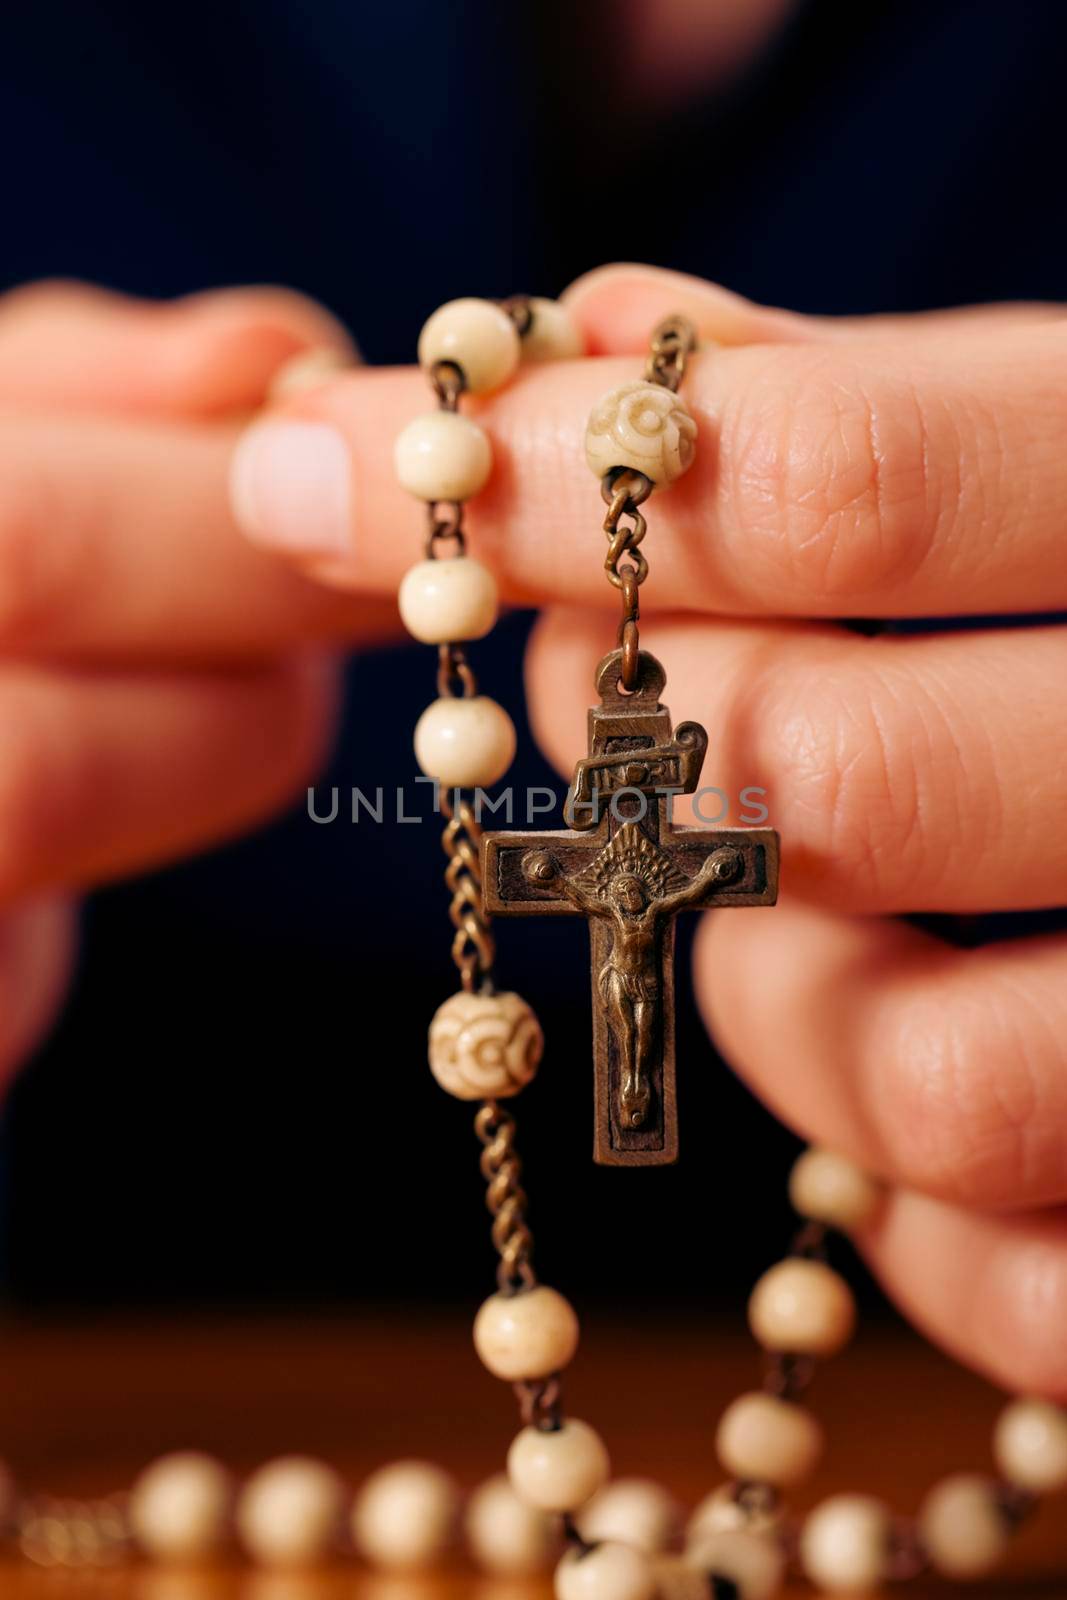 Woman praying with rosary to God by Kzenon